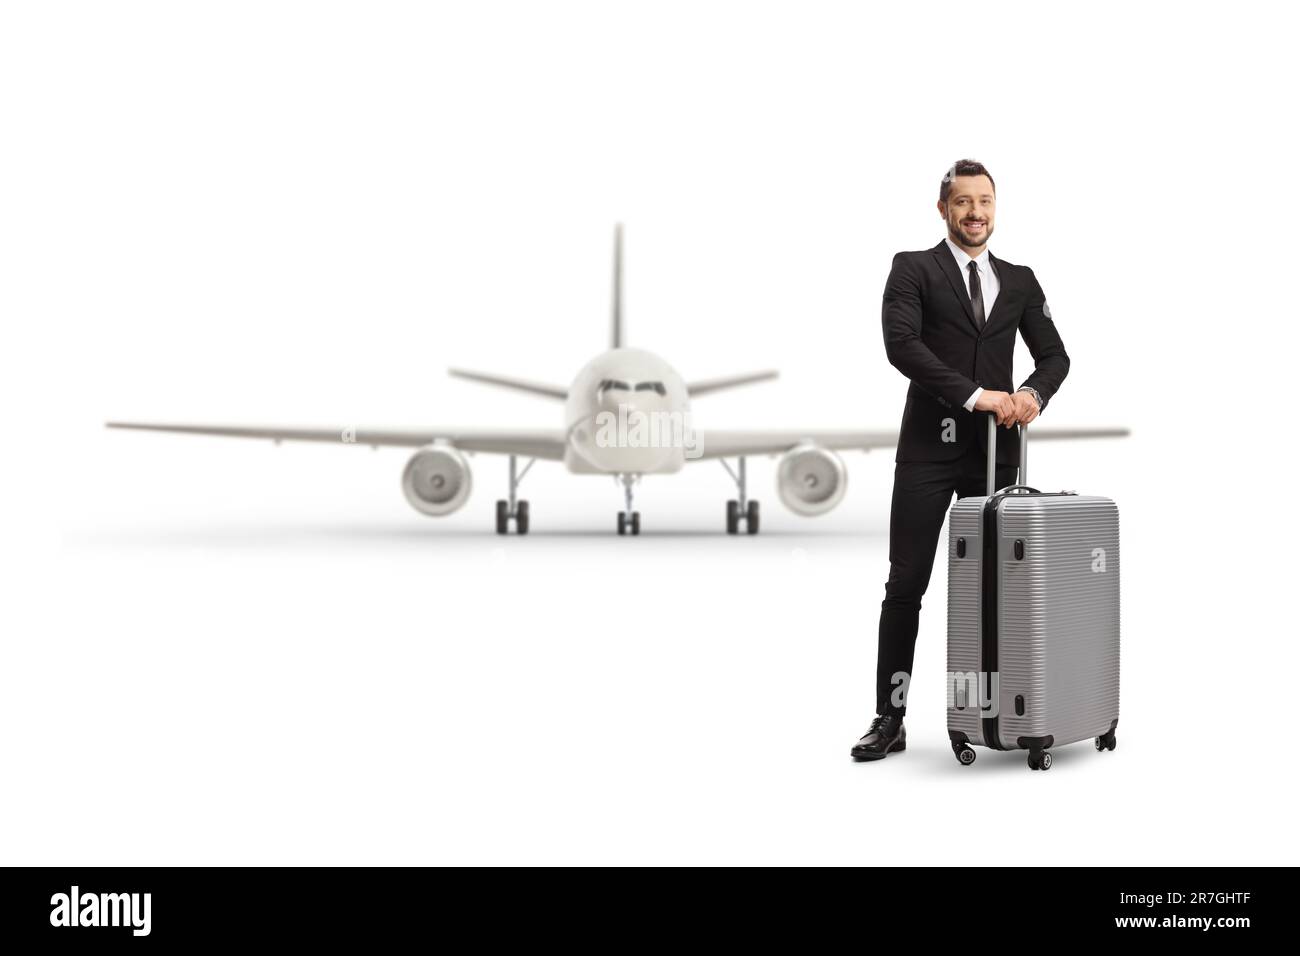 Full length portrait of a professional man posing with a suitcase in front of an airplane isolated on white background Stock Photo